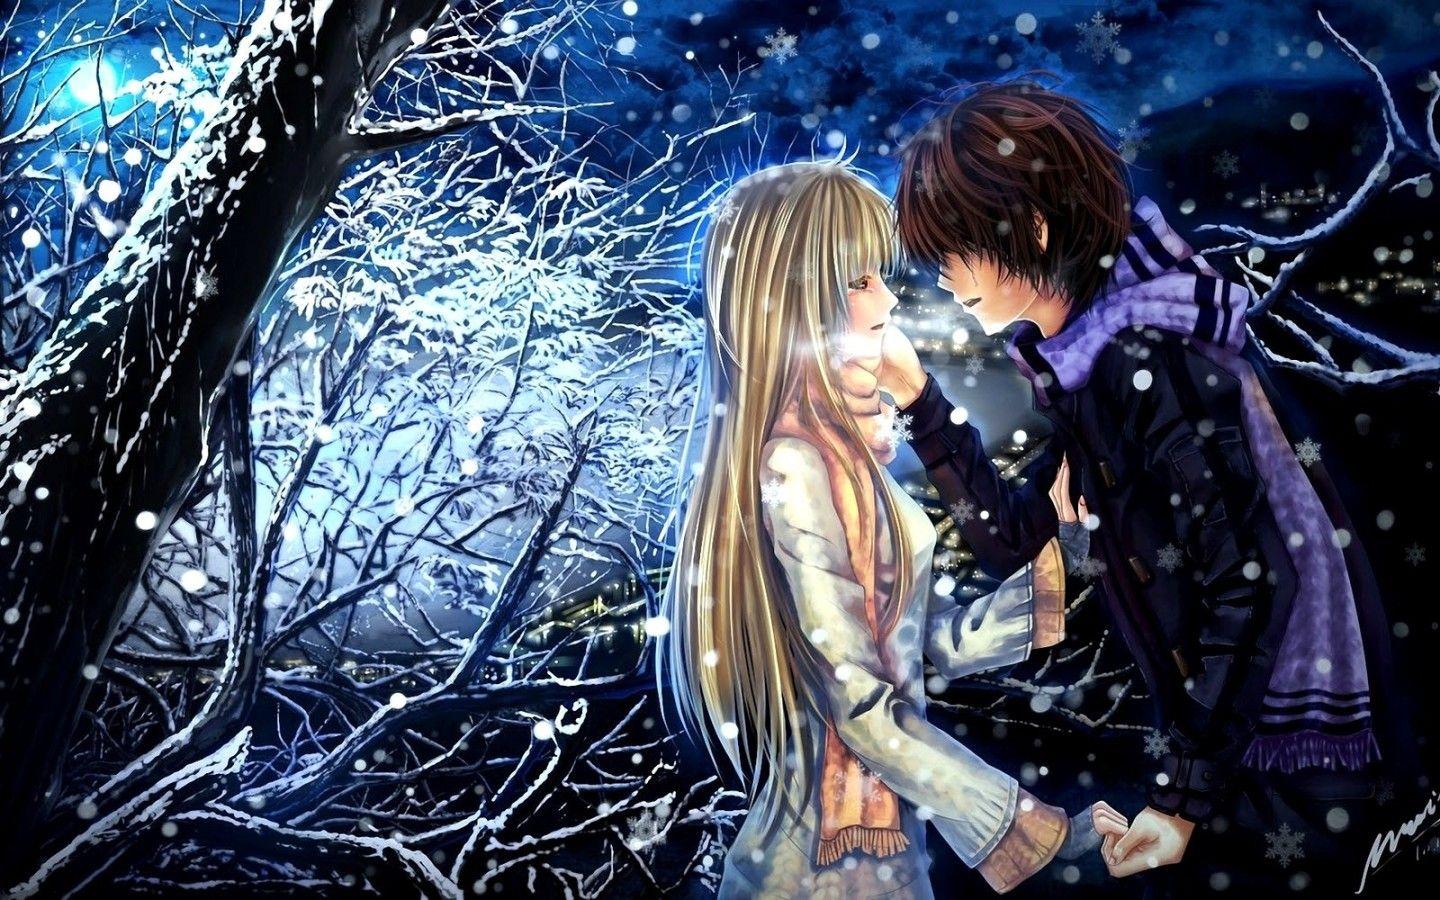 Romantic anime in love HD picture romantic anime kiss and passion